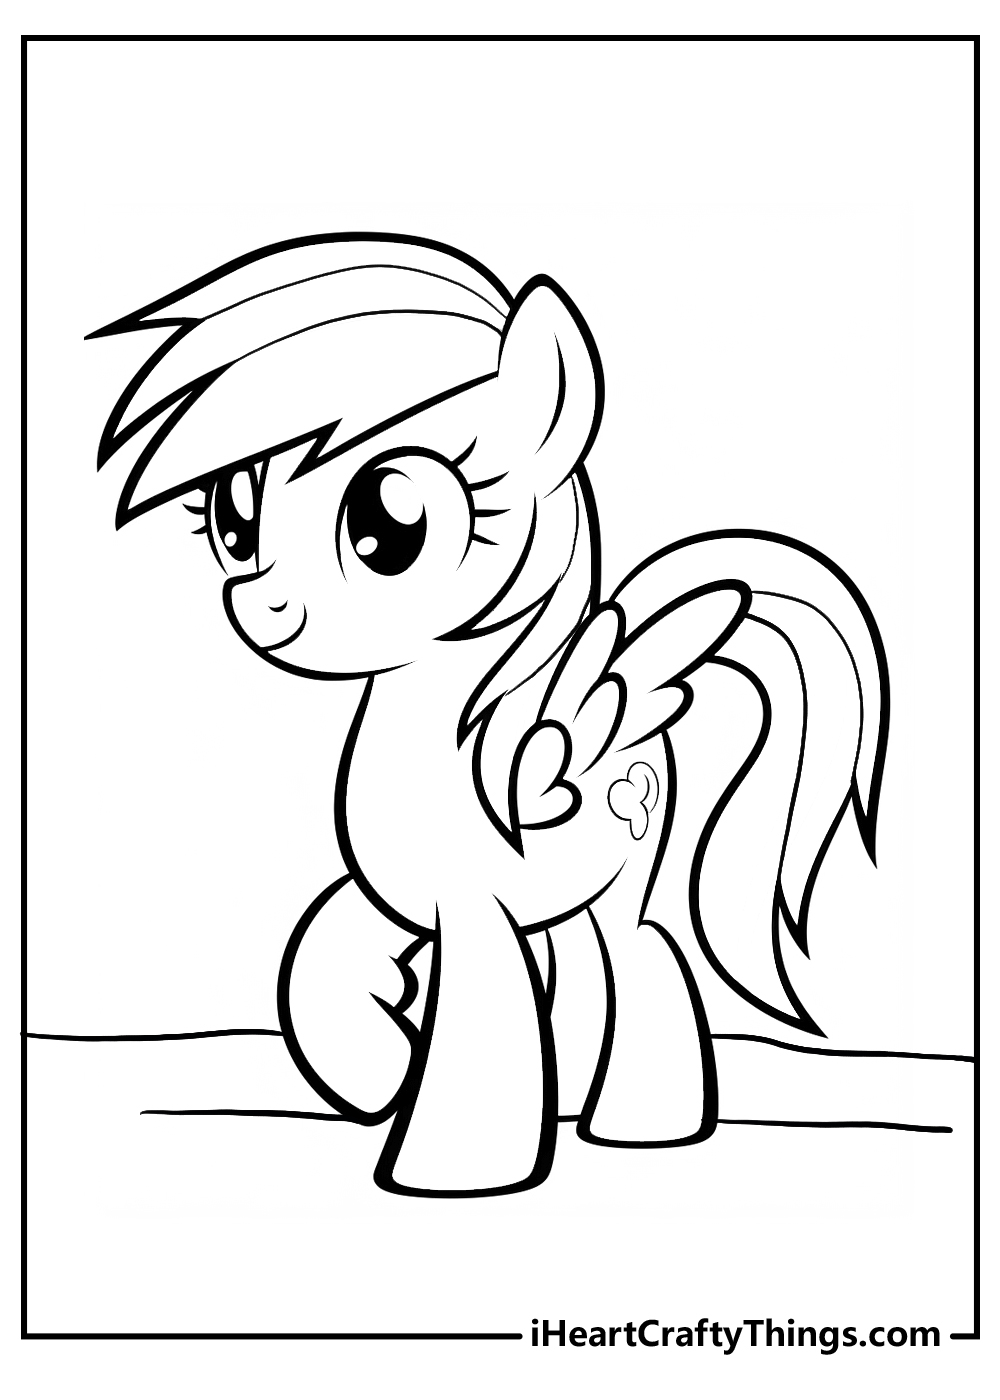 rainbow dash coloring sheet for kids